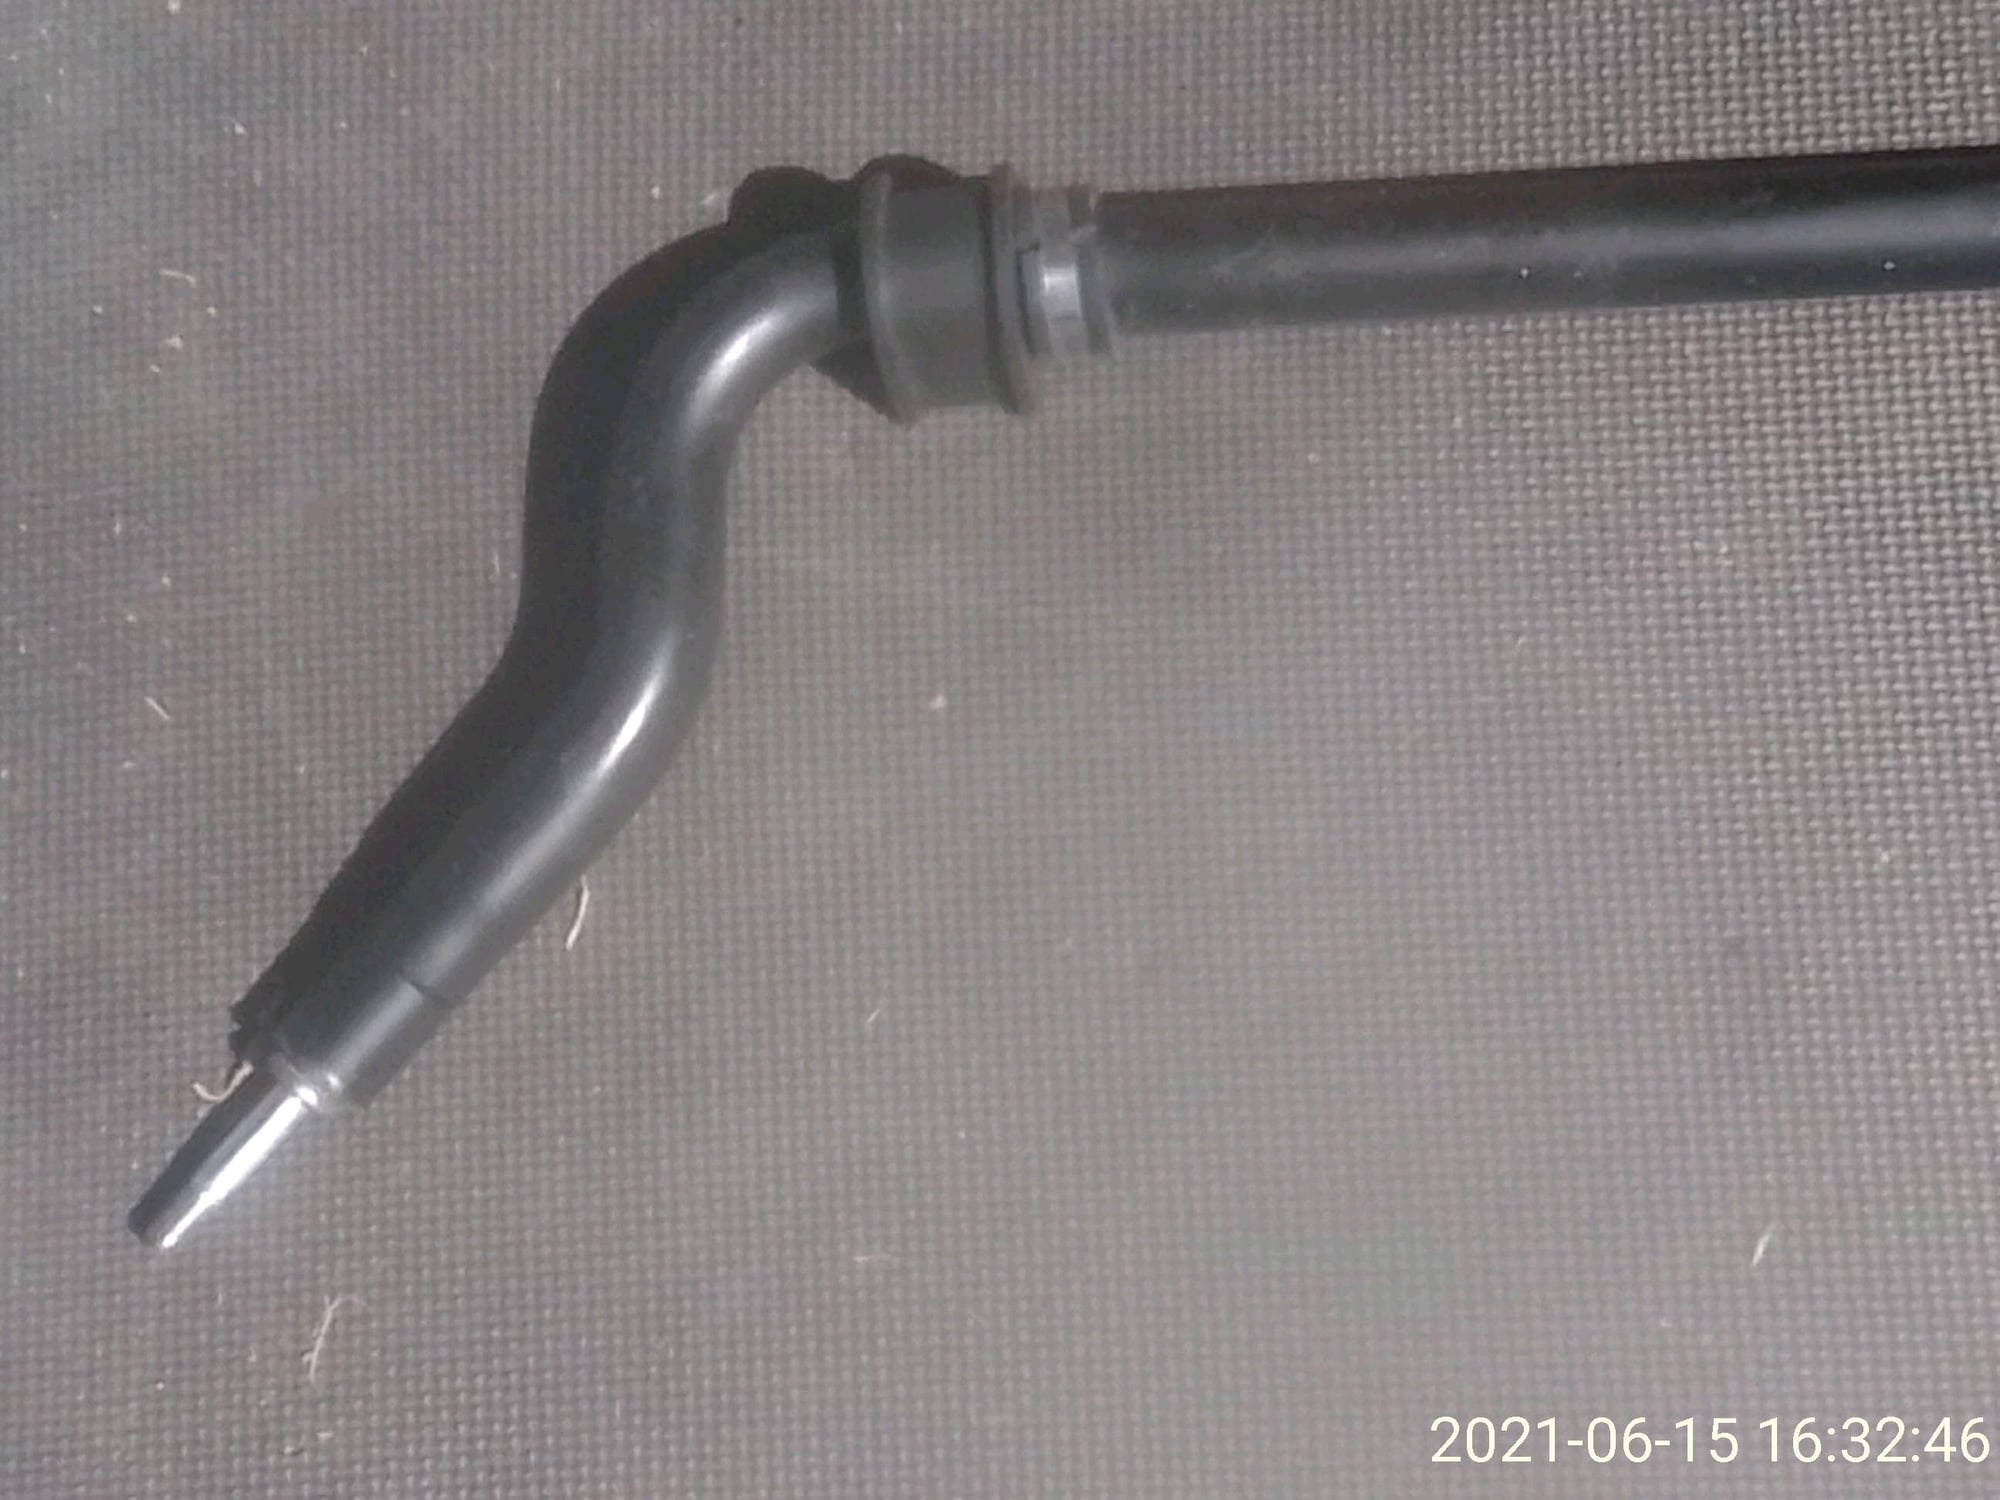 Steering/Suspension - FD OEM Front Sway Bar - Used - 1993 to 1999 Mazda RX-7 - San Jose, CA 95121, United States